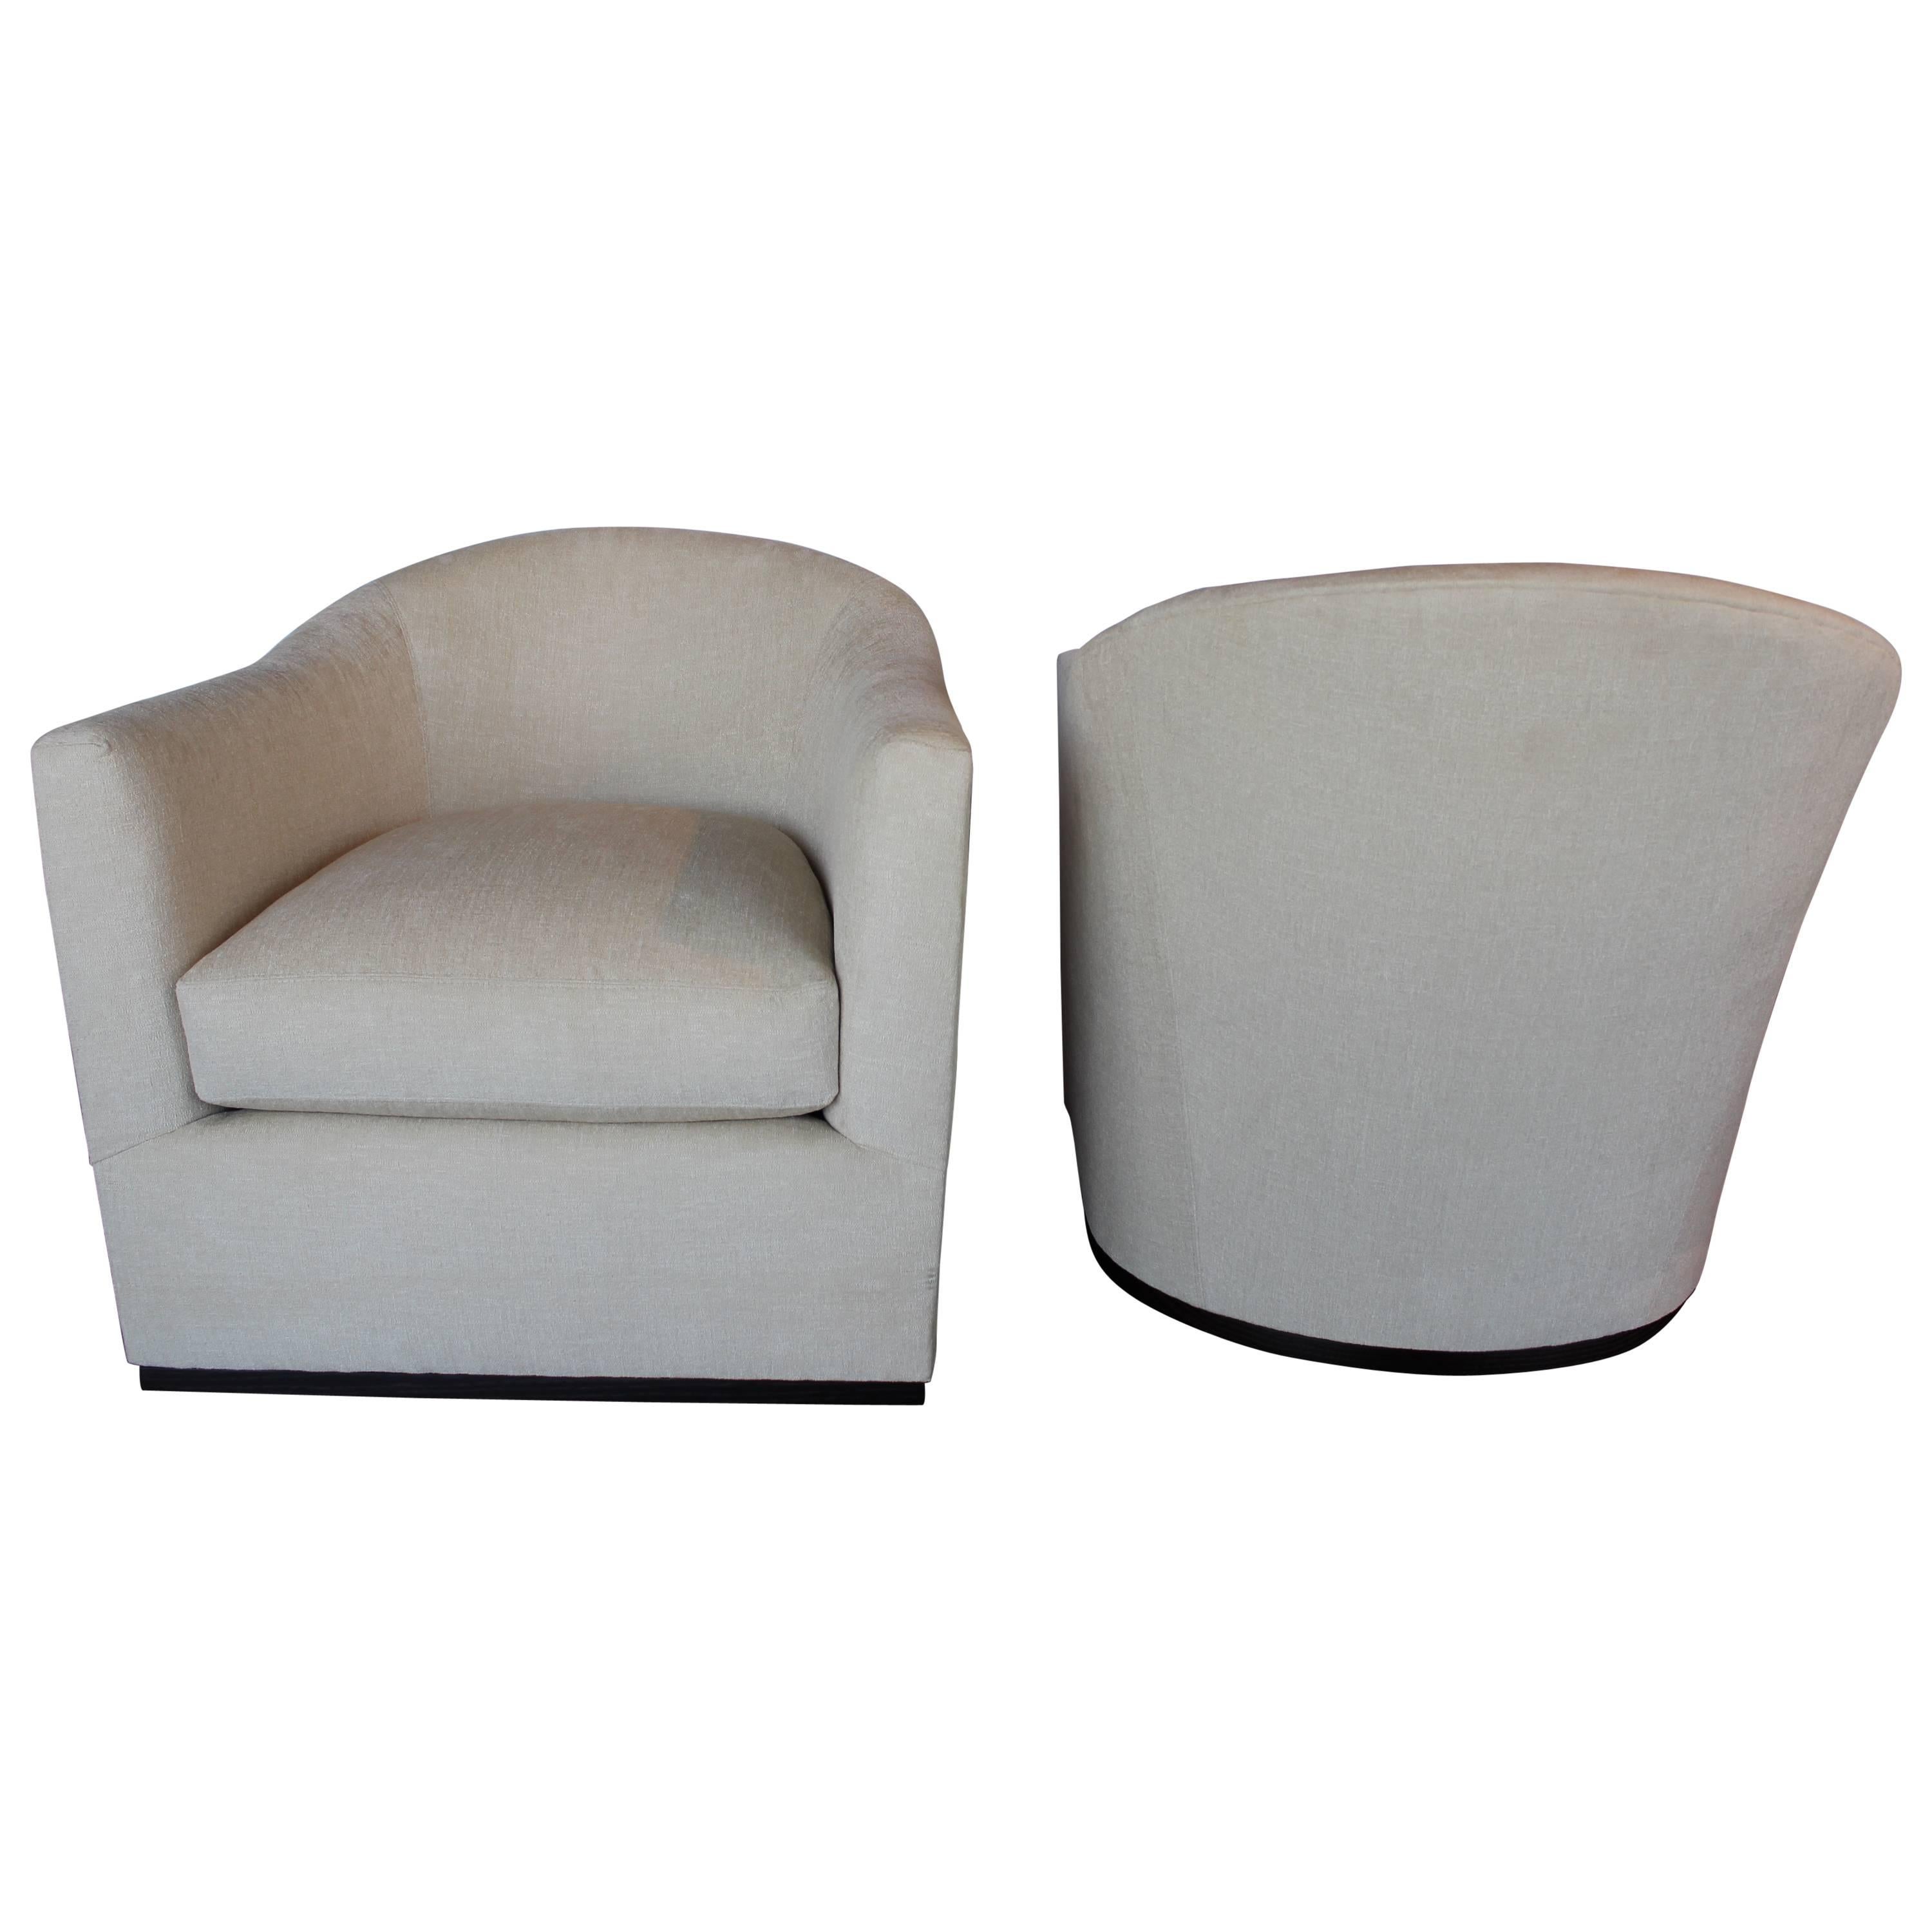 Modern Ivory Stain-Resistant Swivel Chair